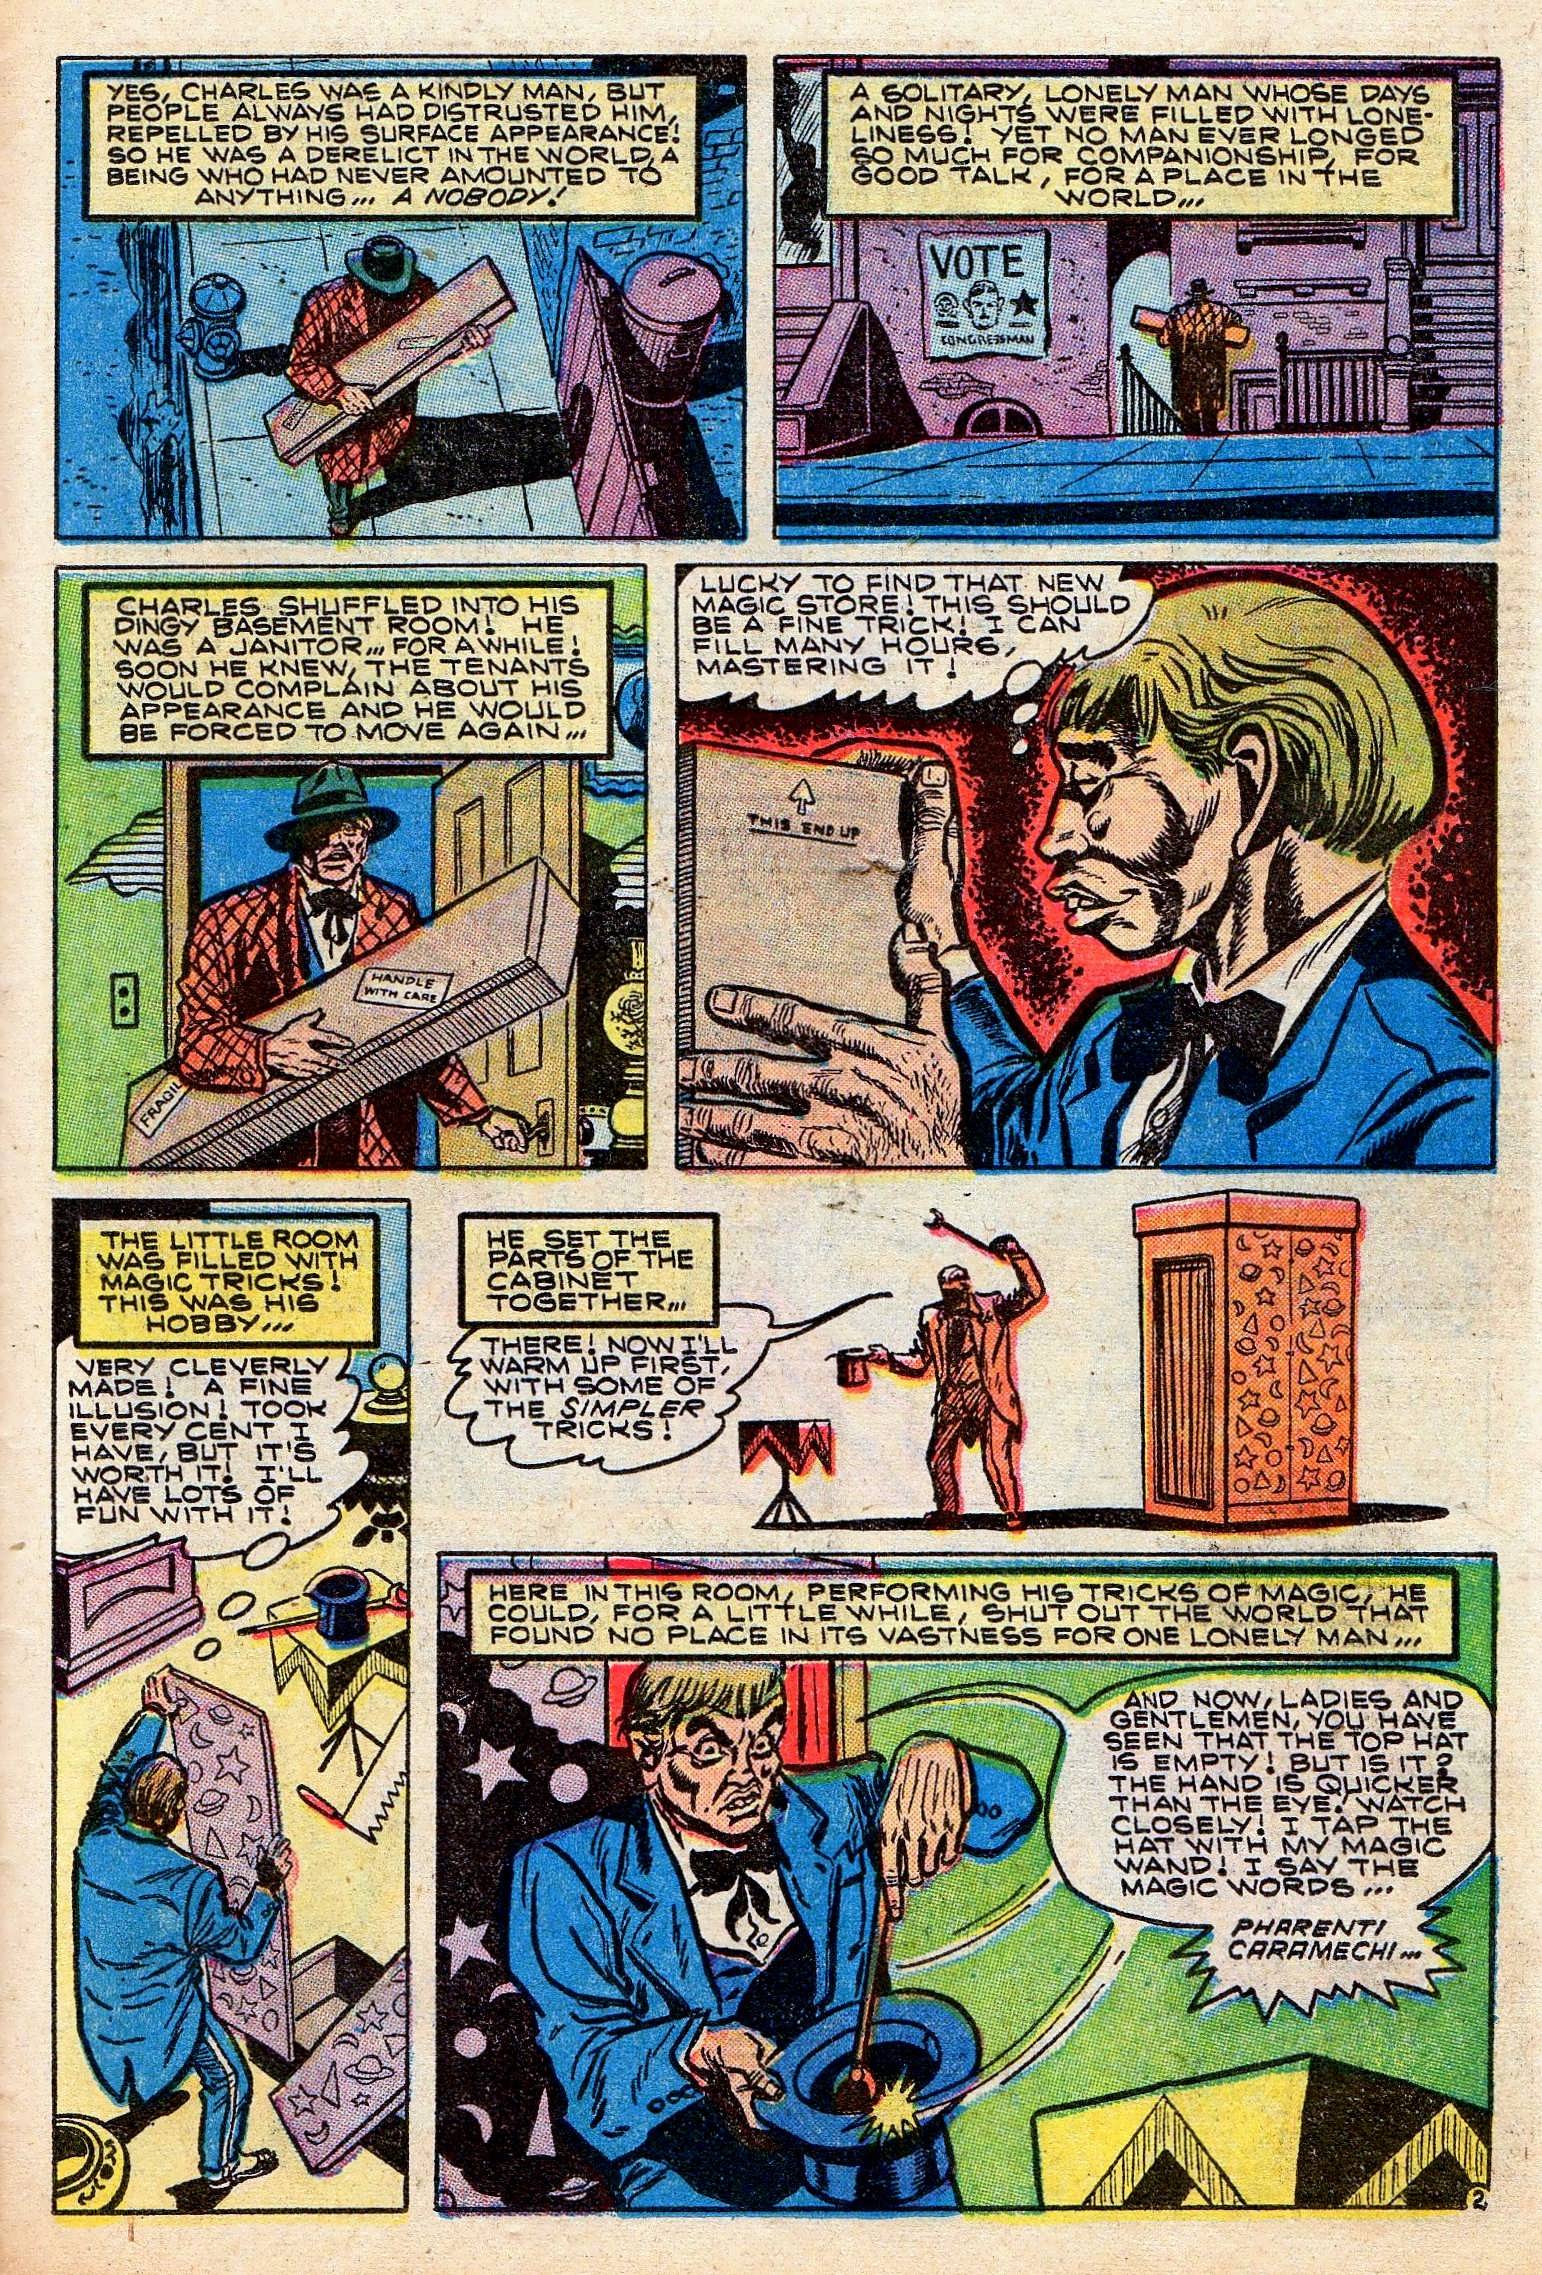 Marvel Tales (1949) 136 Page 22